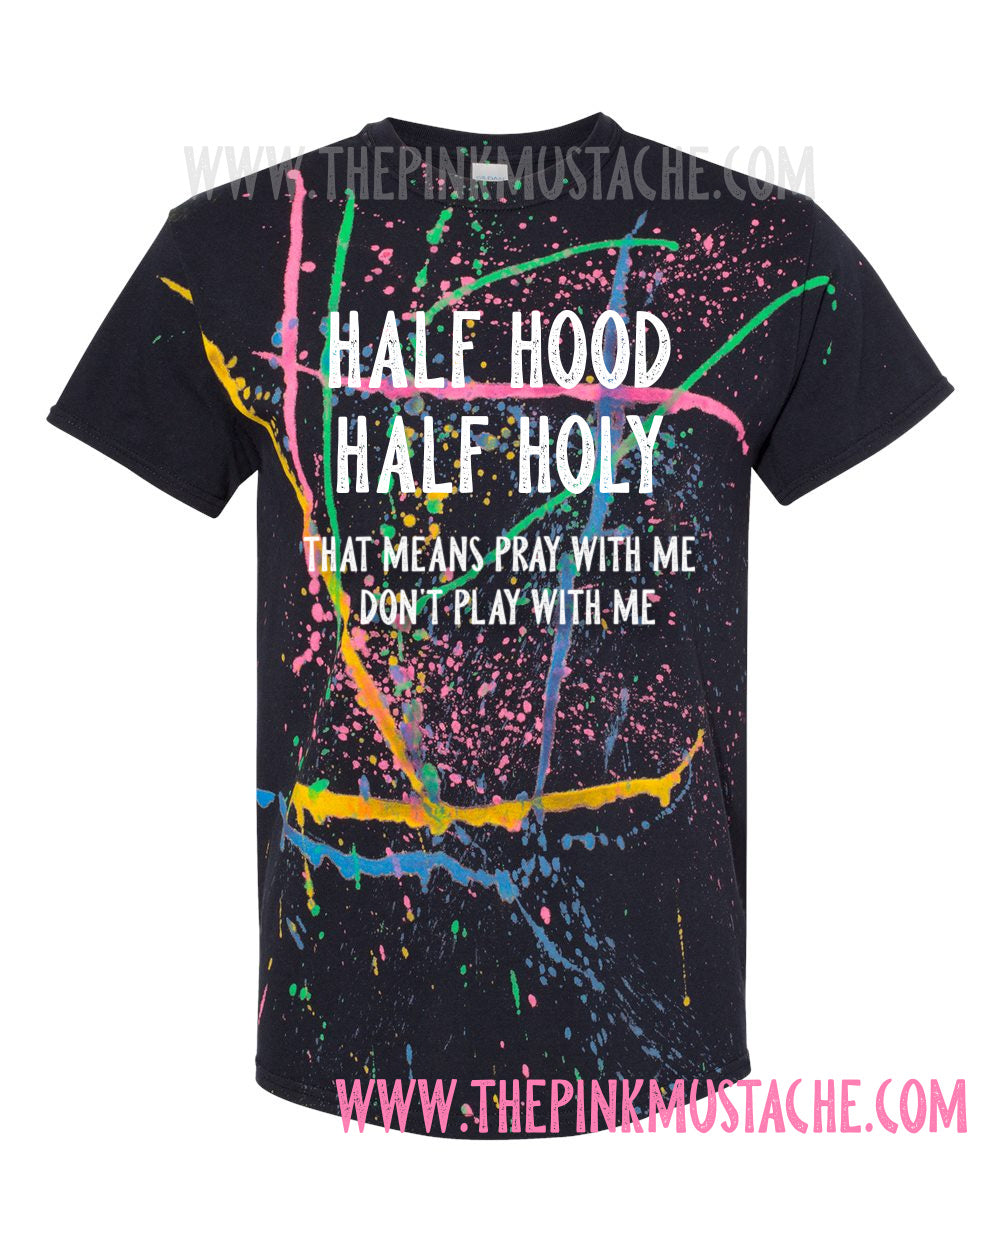 Half Hood Half Holy - That Means Pray With Me Don't Play With Me Splatter Tee/ Funny Tees